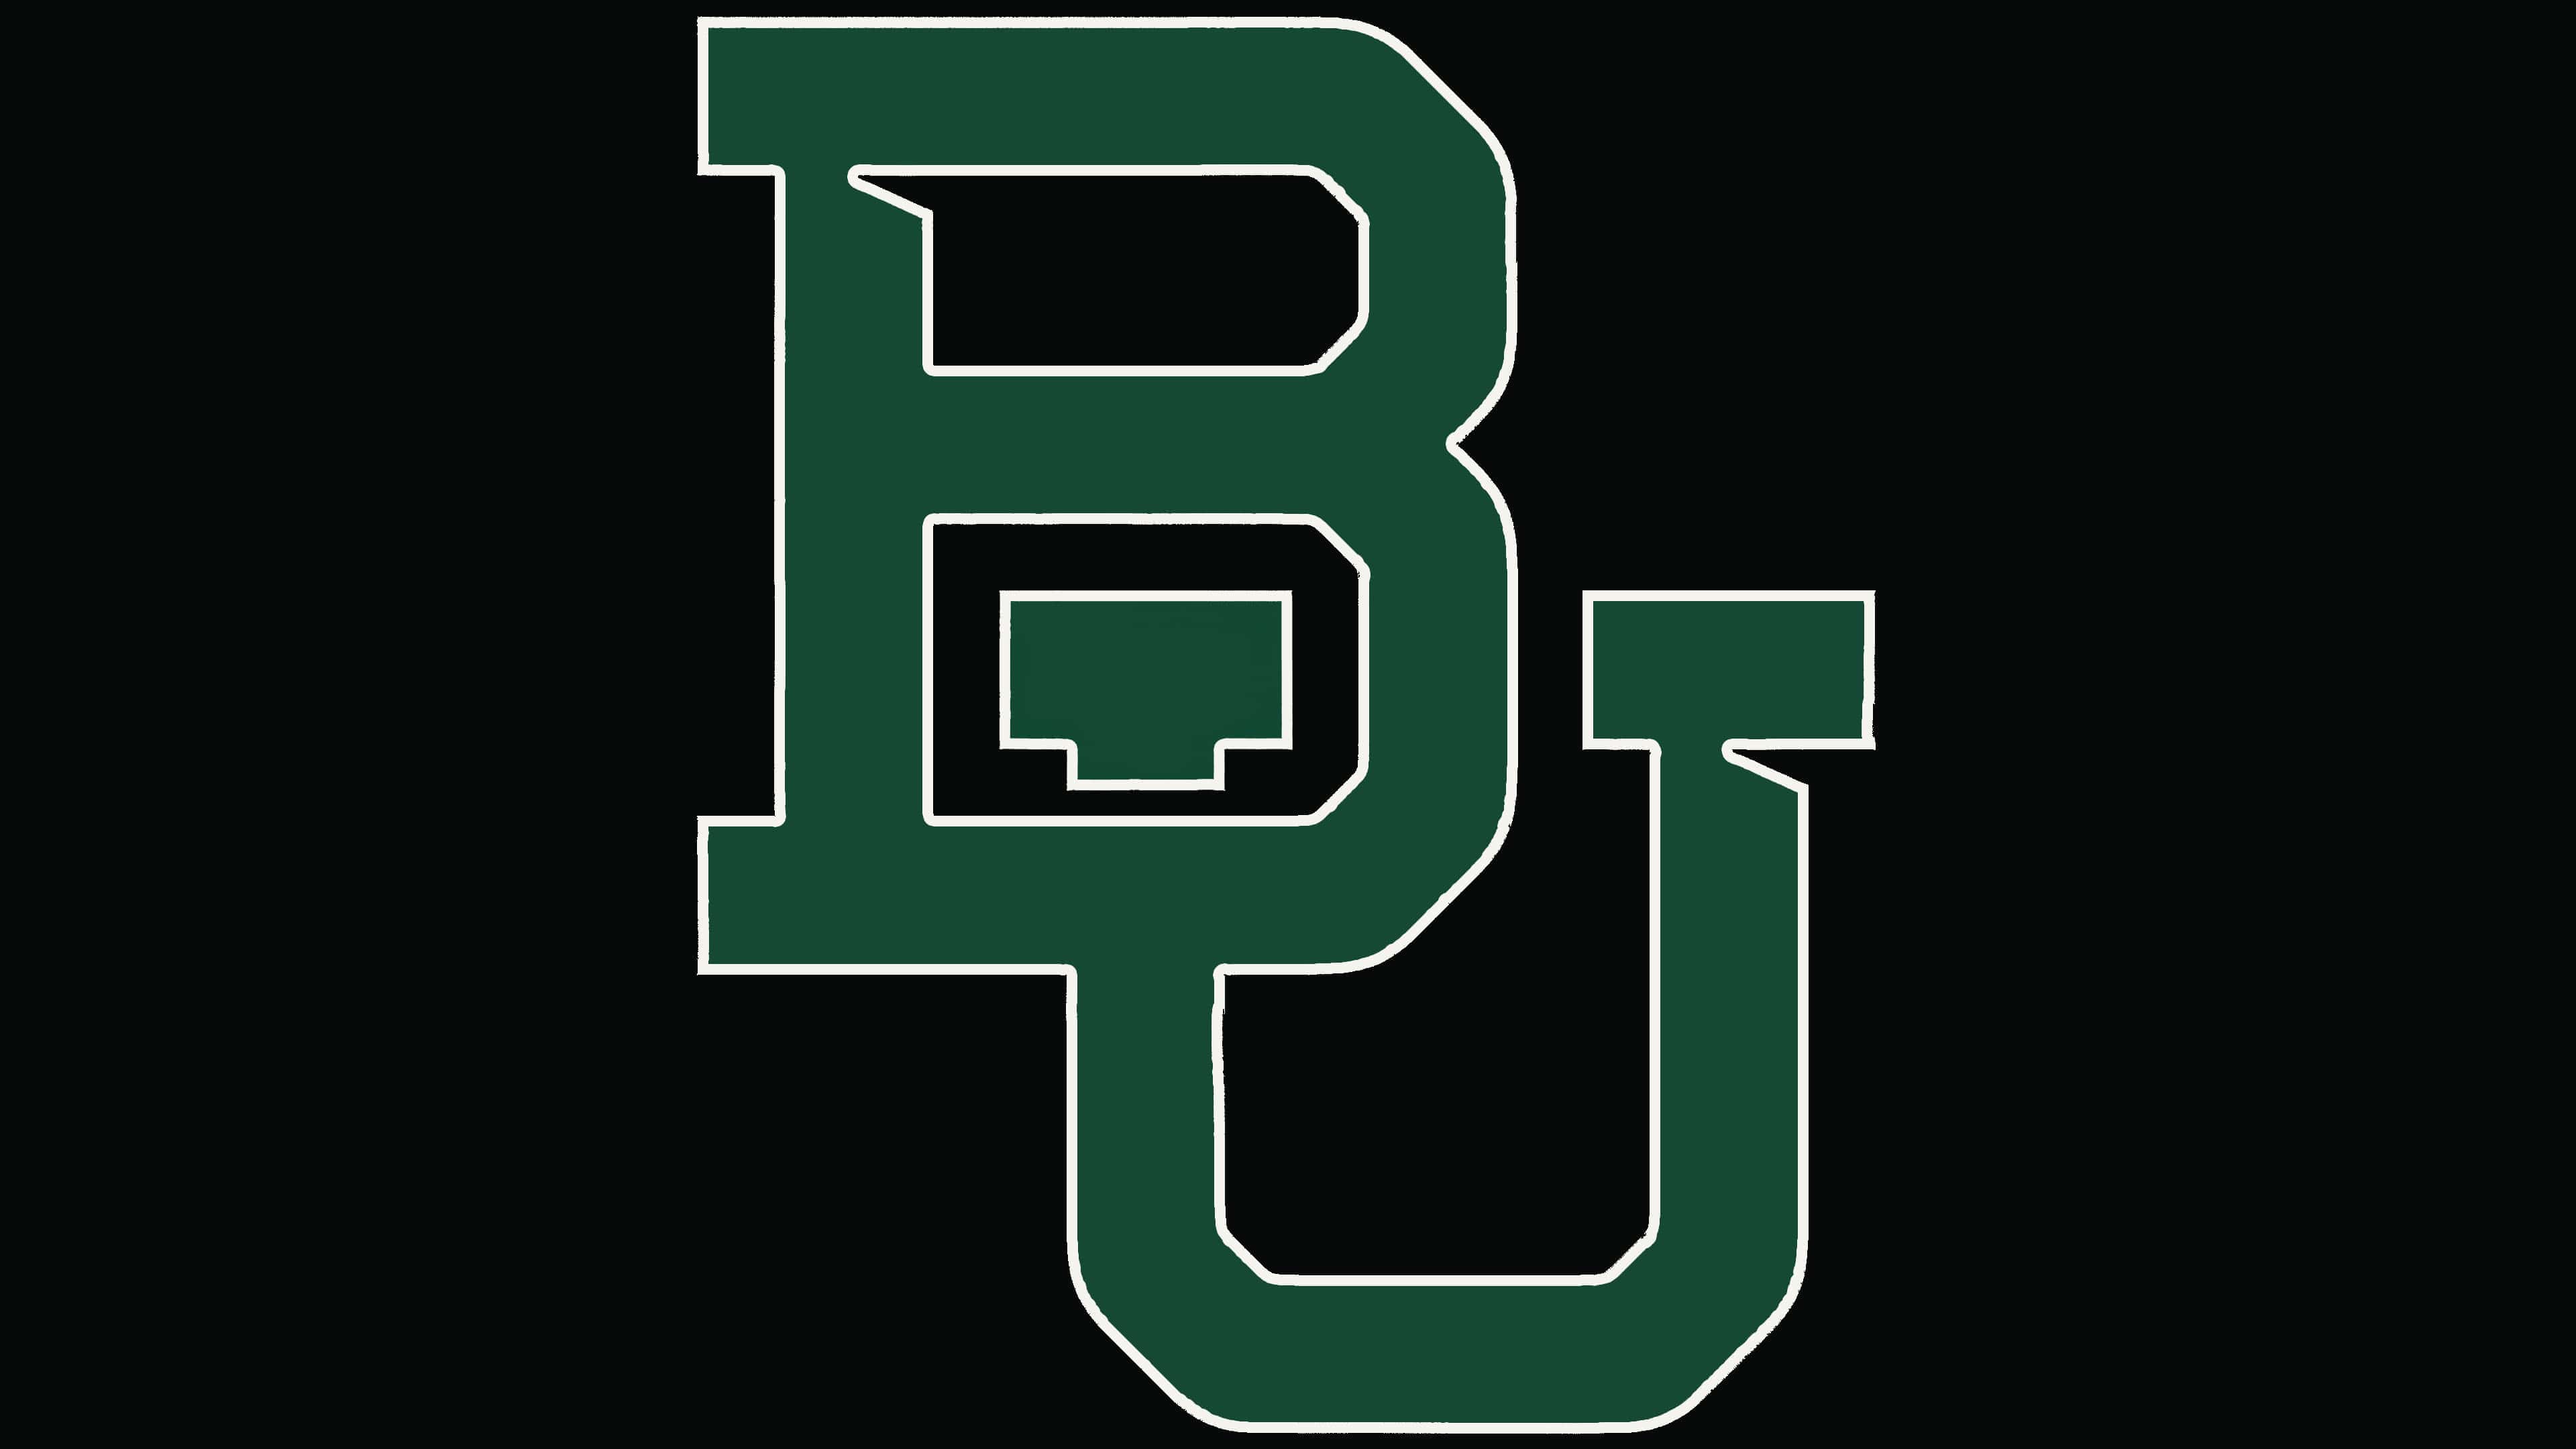 Baylor Bears Logo The Most Famous Brands And Company Logos In The World